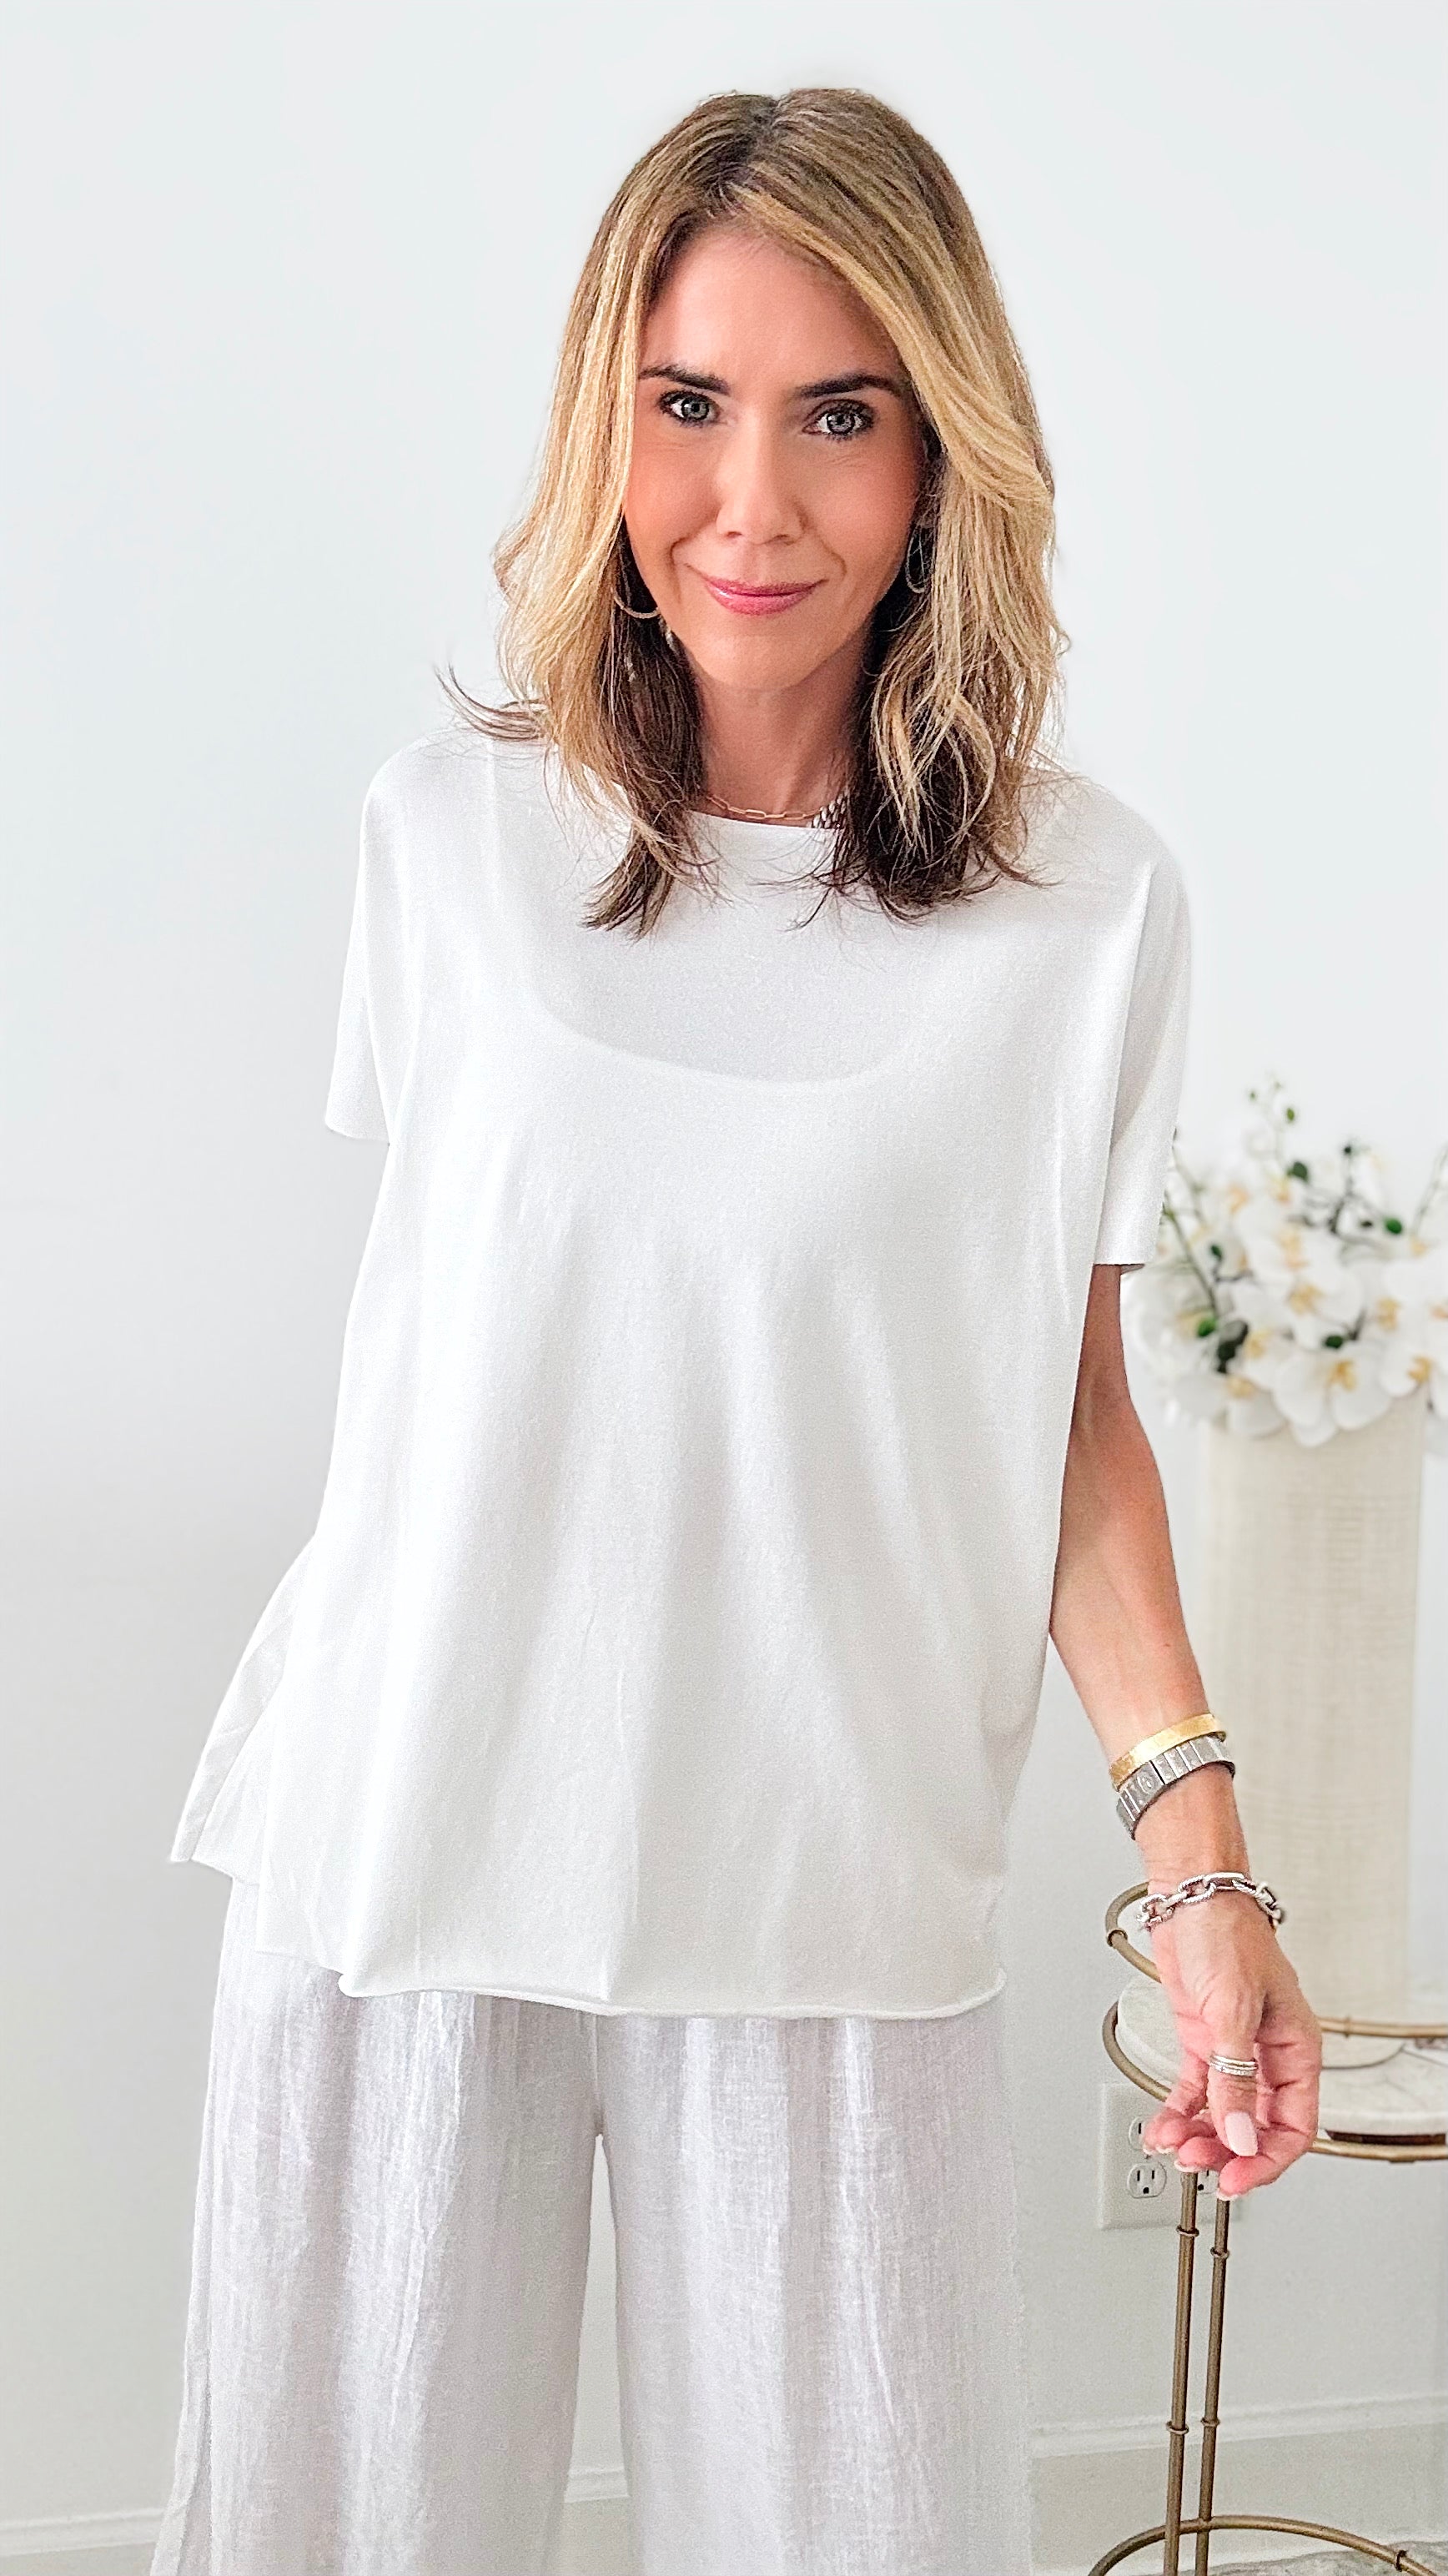 Easy Breezy Italian tee - White-110 Short Sleeve Tops-Italianissimo-Coastal Bloom Boutique, find the trendiest versions of the popular styles and looks Located in Indialantic, FL